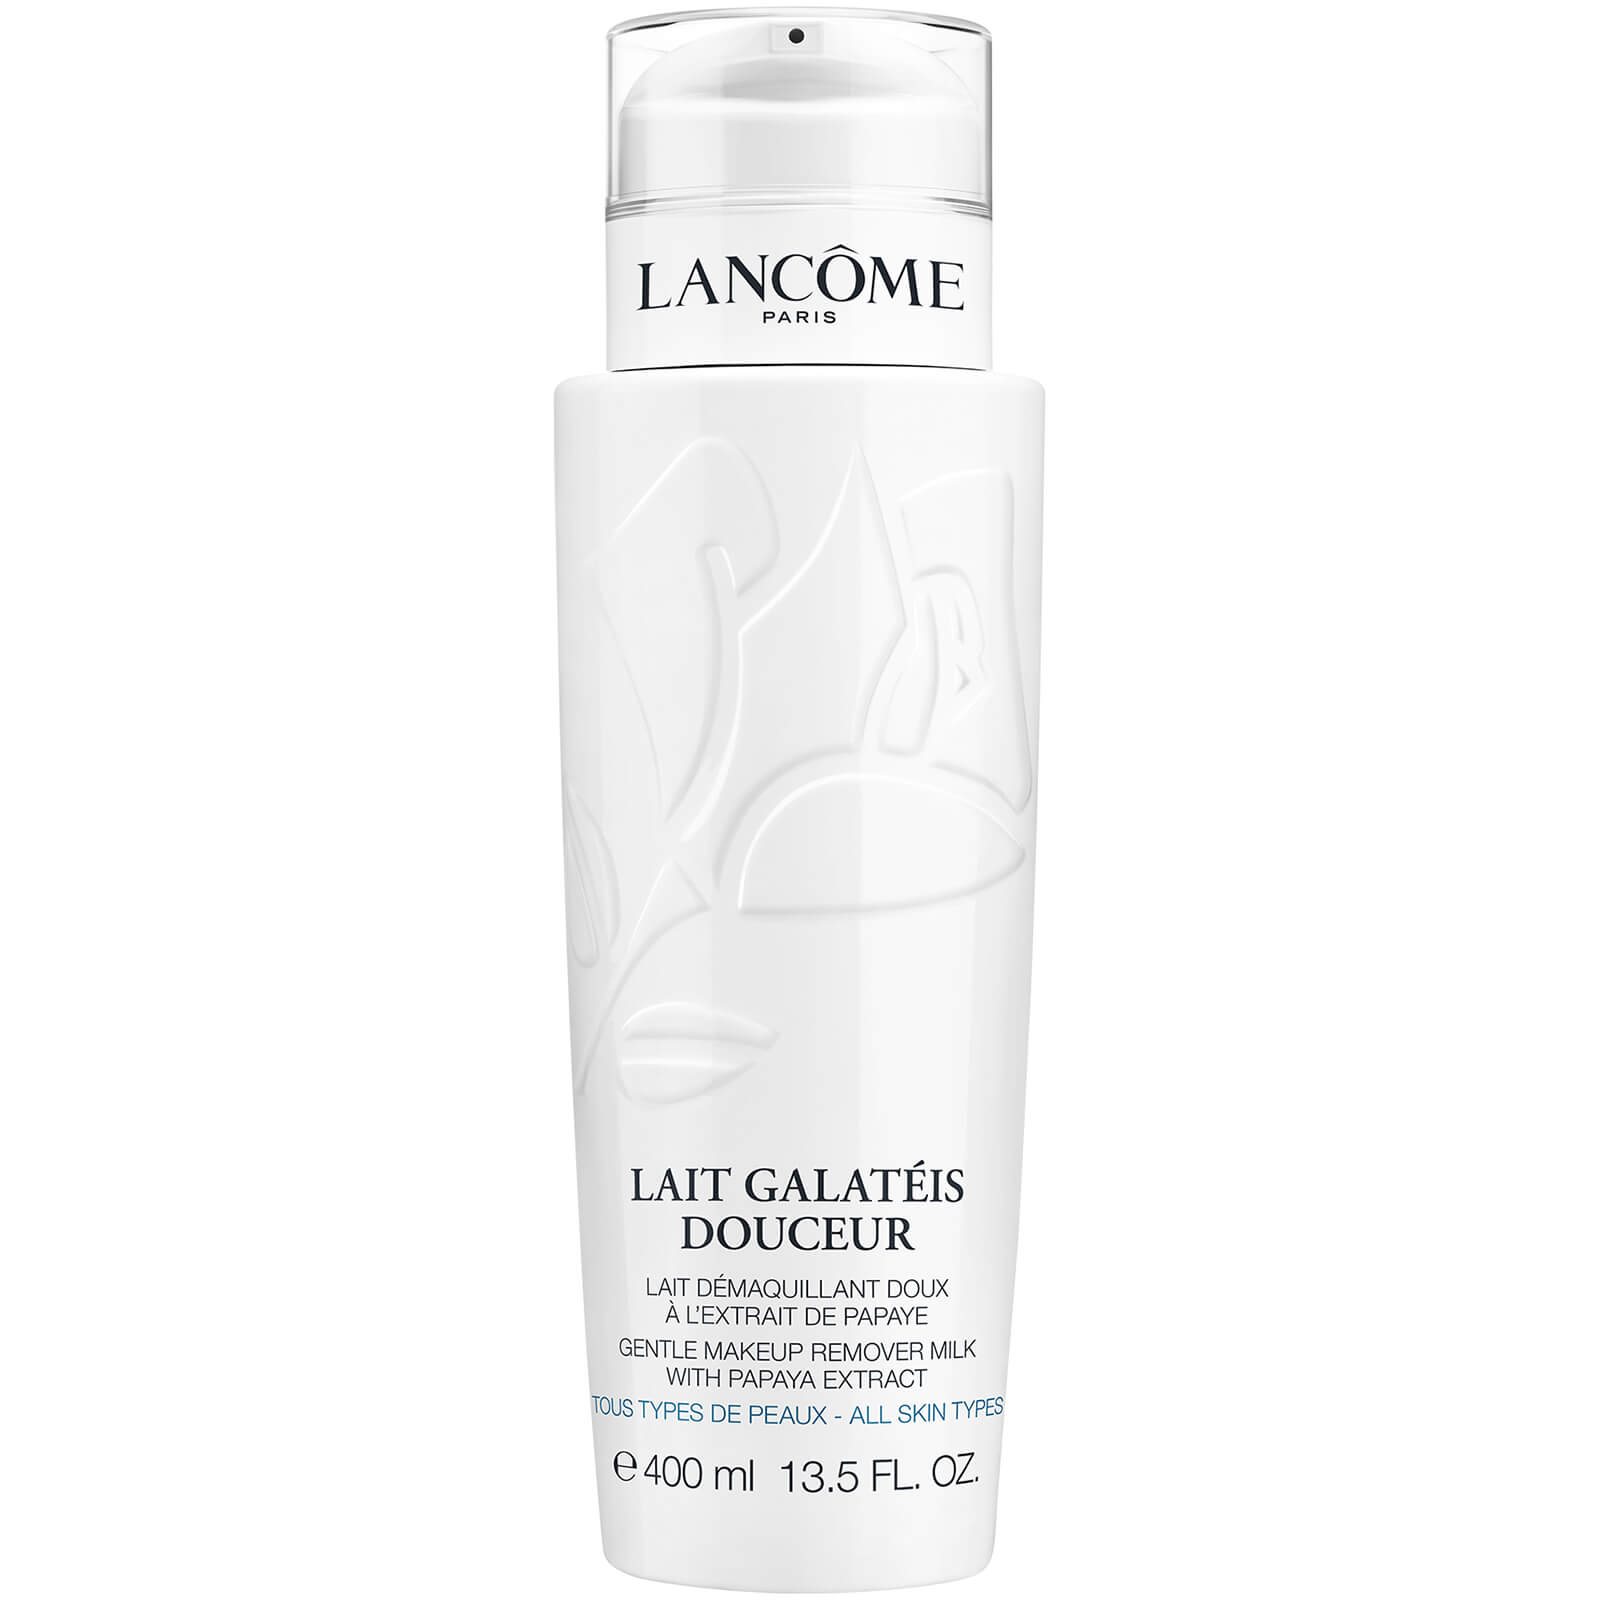 Lancome Galateis Douceur Facial Cleanser (Various Sizes) - 400ml